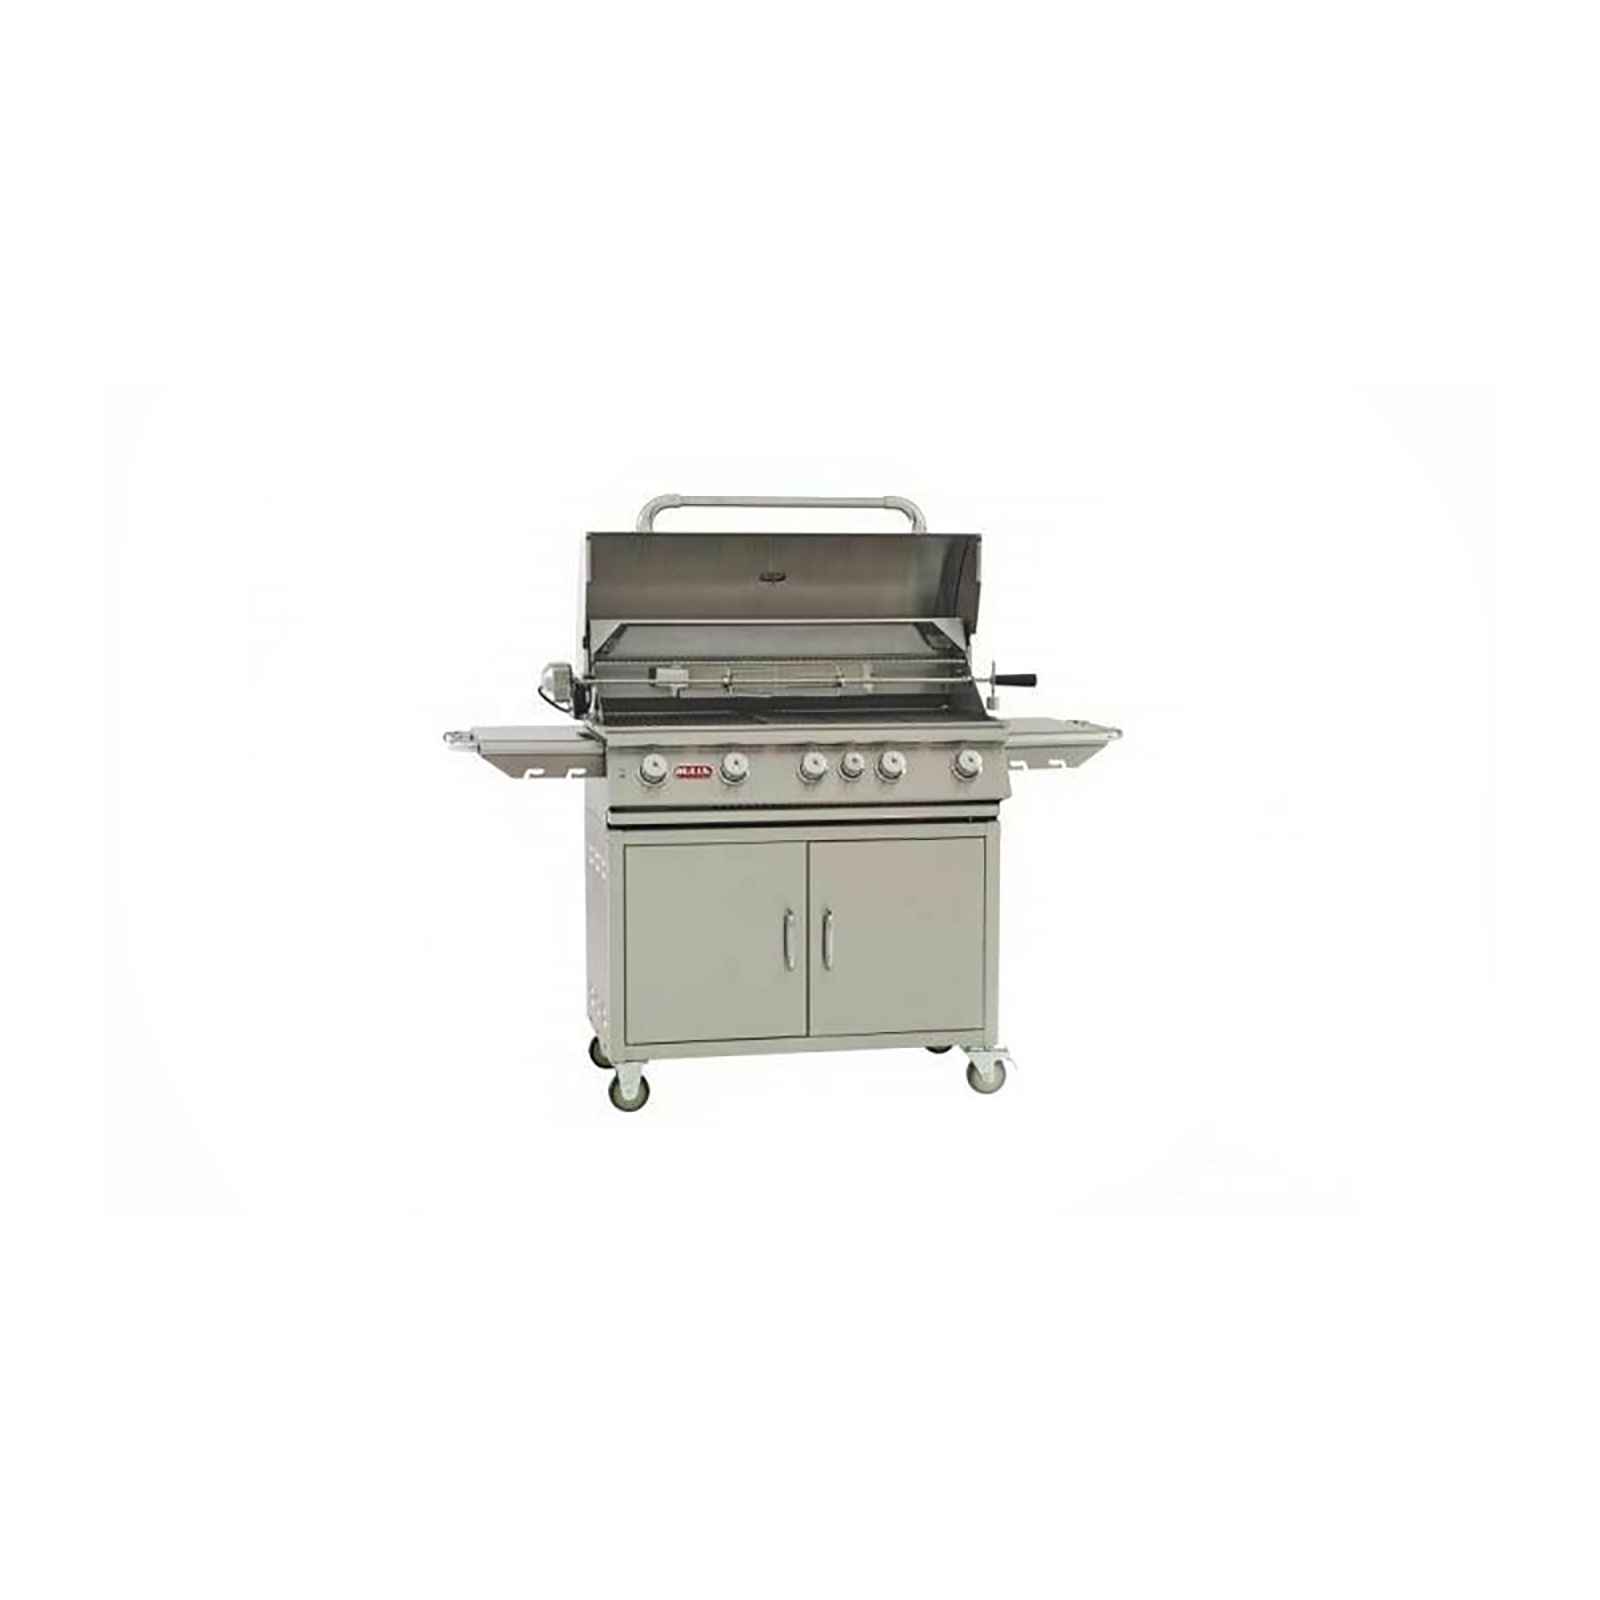 Bull Outdoor Products 5 Burner 38" Brahma Stainless Steel Propane Gas Grill